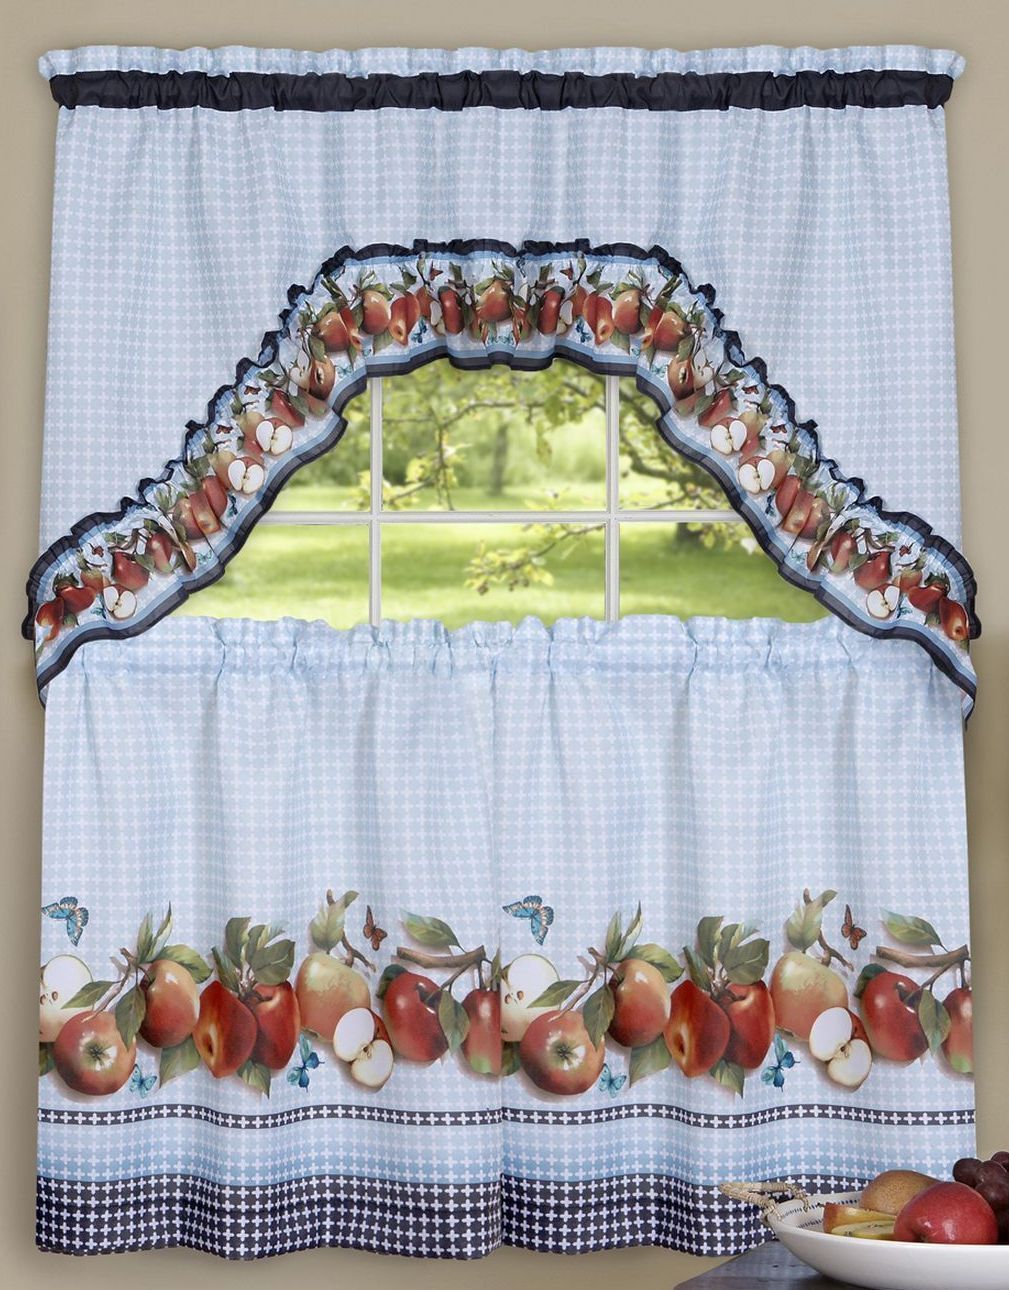 3 Pc Curtains Set: 2 Tiers & Swag (57"x30") And 18 Similar Items Inside Delicious Apples Kitchen Curtain Tier And Valance Sets (View 8 of 20)